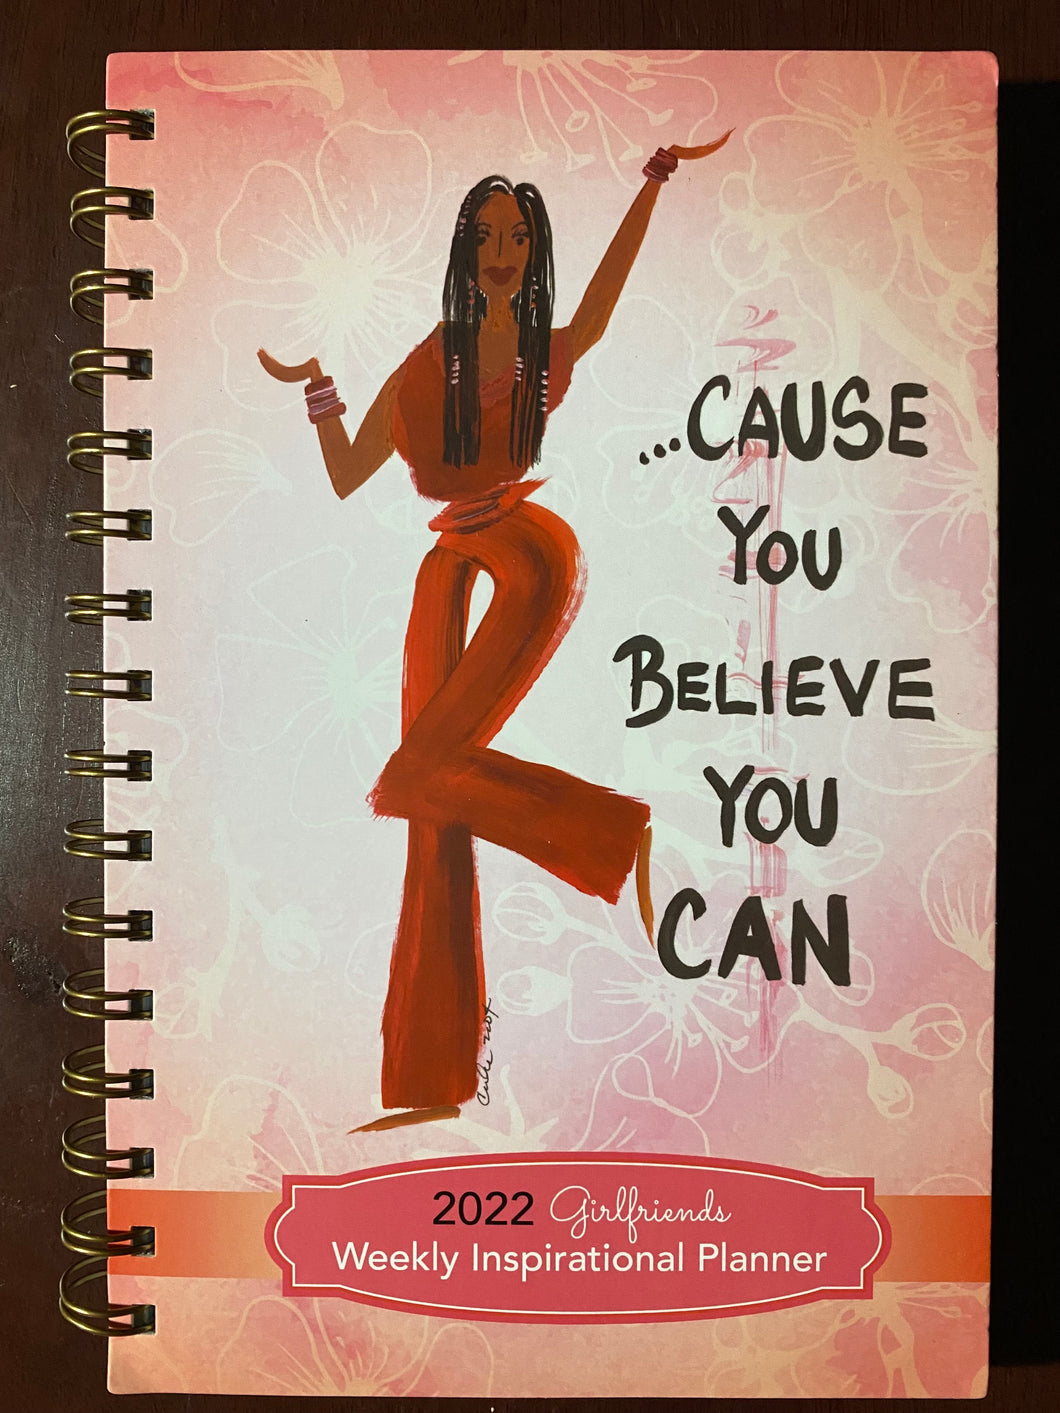 NEW!!! Cause You Believe You Can 2022 Weekly Inspirational Planner